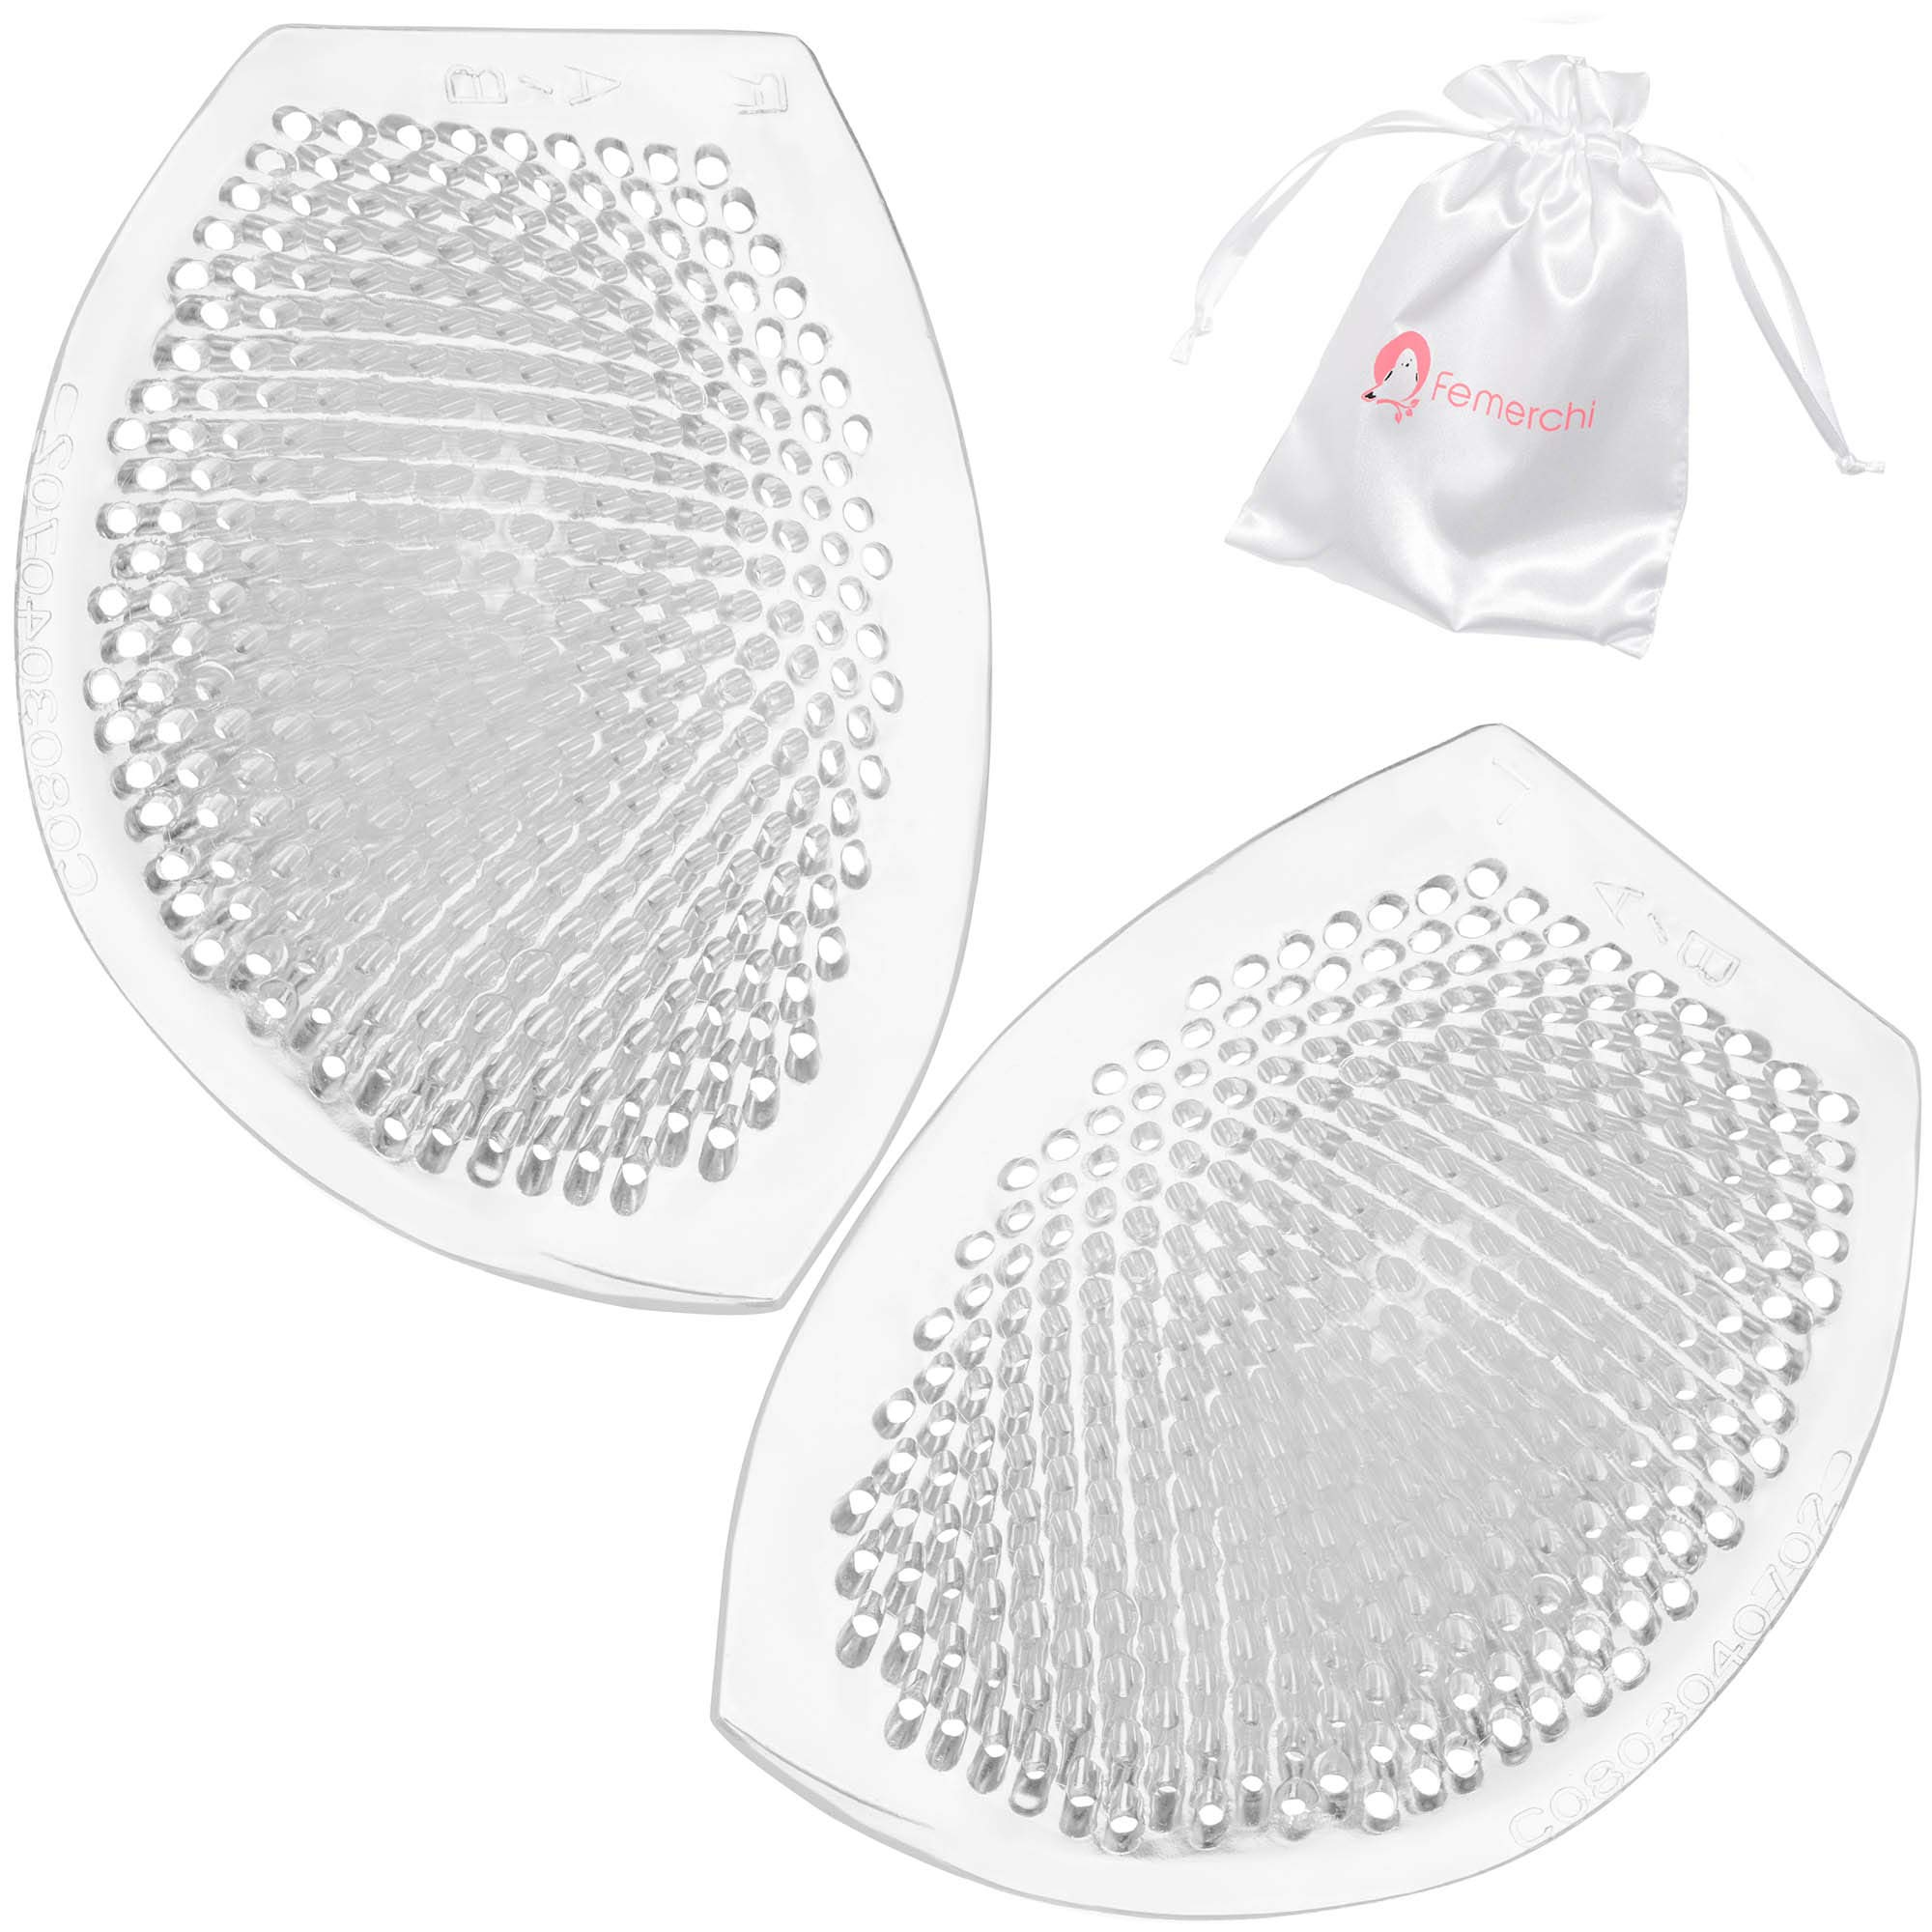 Silicone Gel Bra Inserts Breathable And Reusable Breast Enhancers